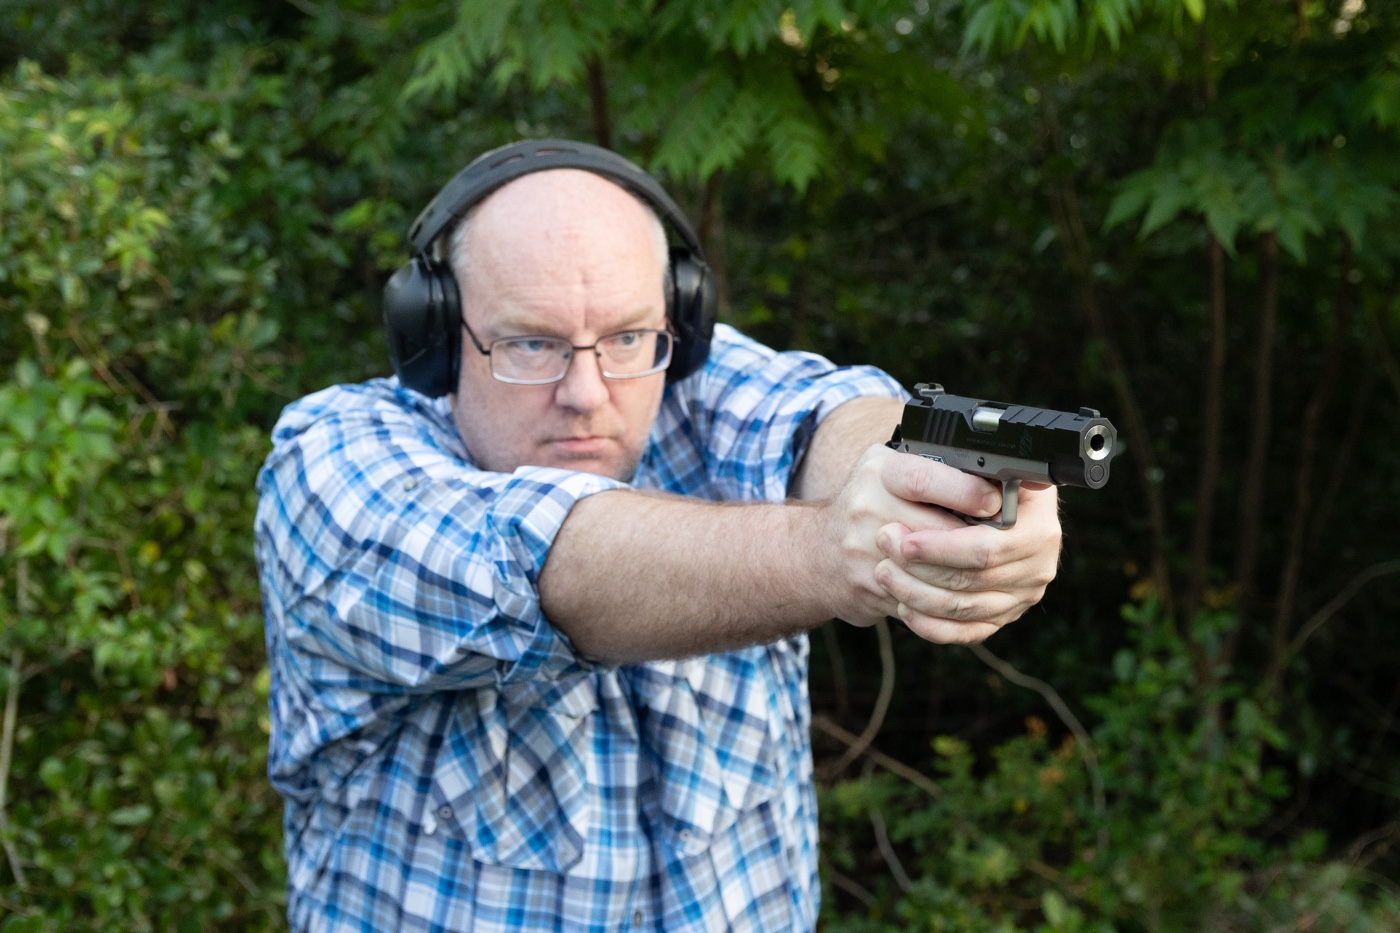 Shown here is Richard Johnson, the managing editor of The Armory Life, shooting a Springfield Armory Emissary 1911 pistol. The Springfield 1911 is a modern version of the M1911 pistol used by the United States of America.